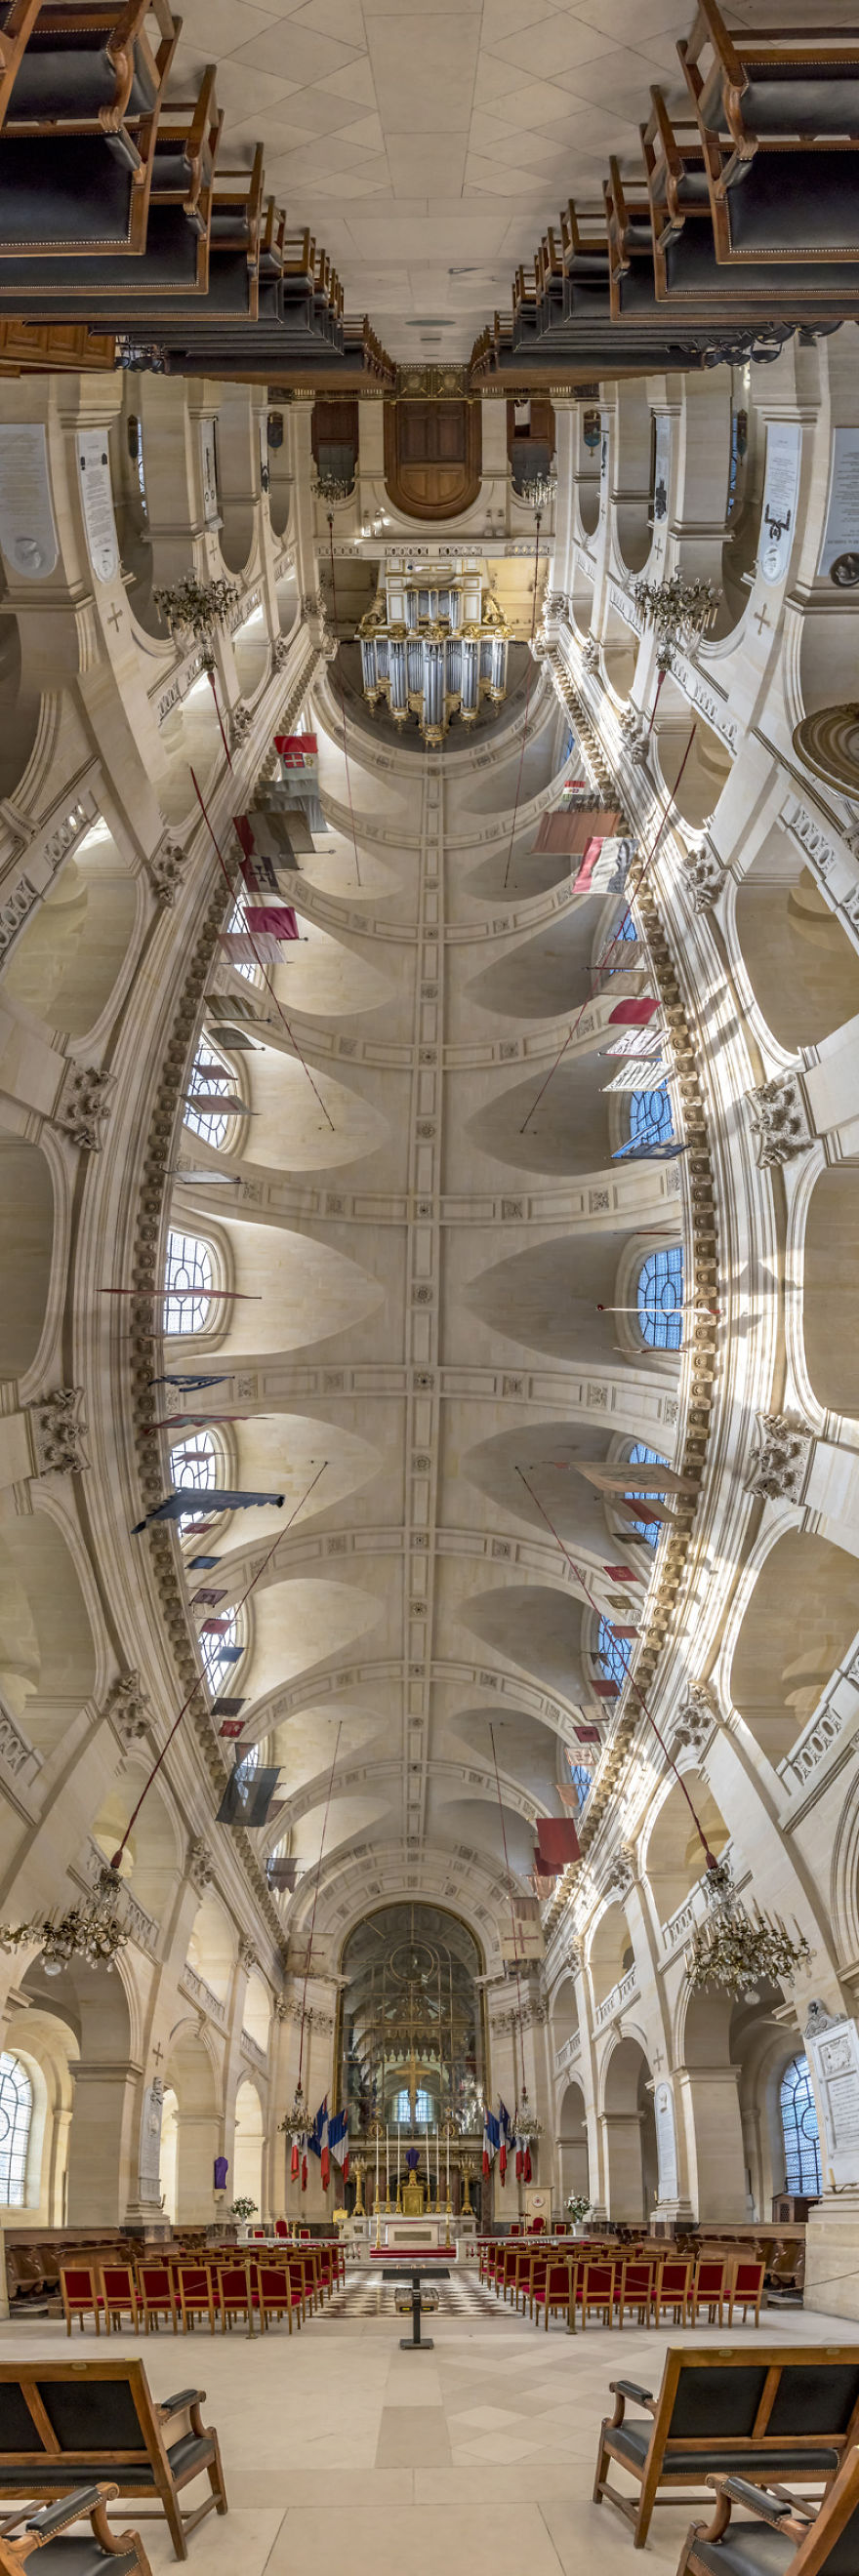 The Churches Of Paris That I Photographed In A Unique Way